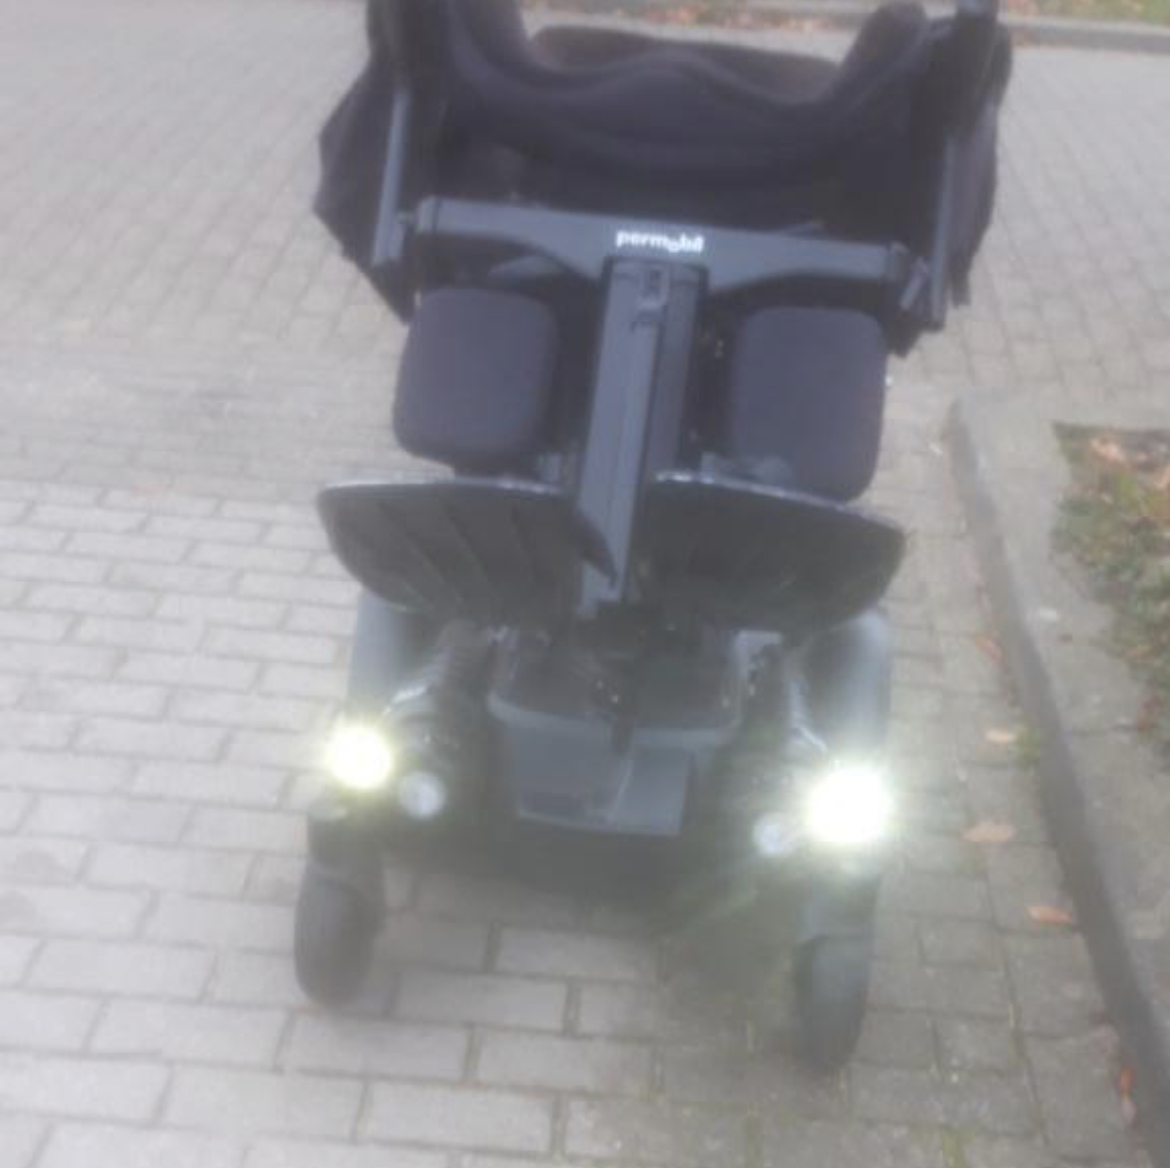 Permobil M5 Corpus Power Wheelchair with all options Manufactured 2021